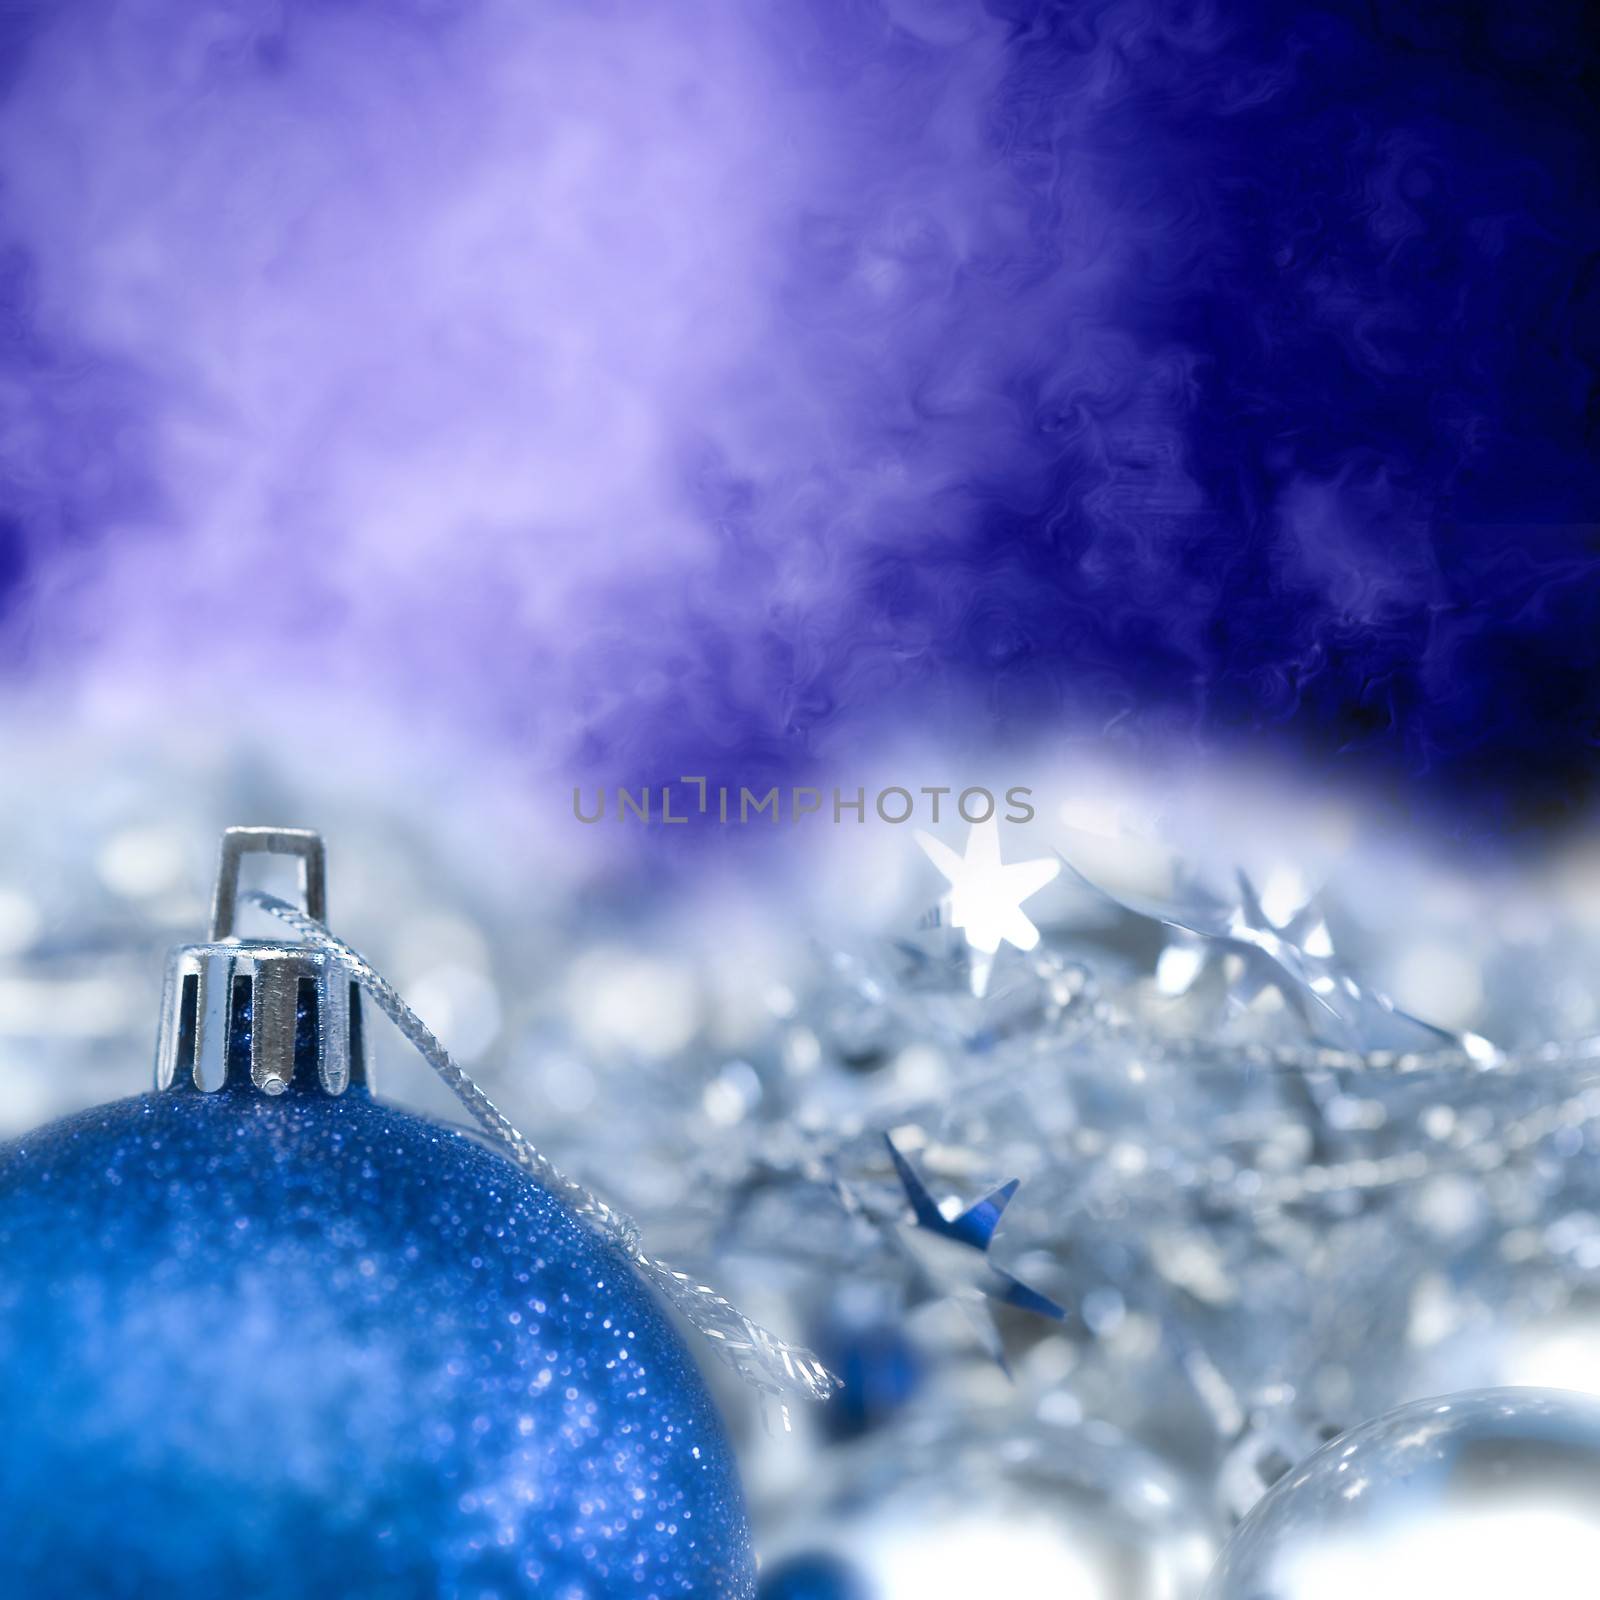  Bright Christmas ornament blue ball and stars out of focus with copy space for text